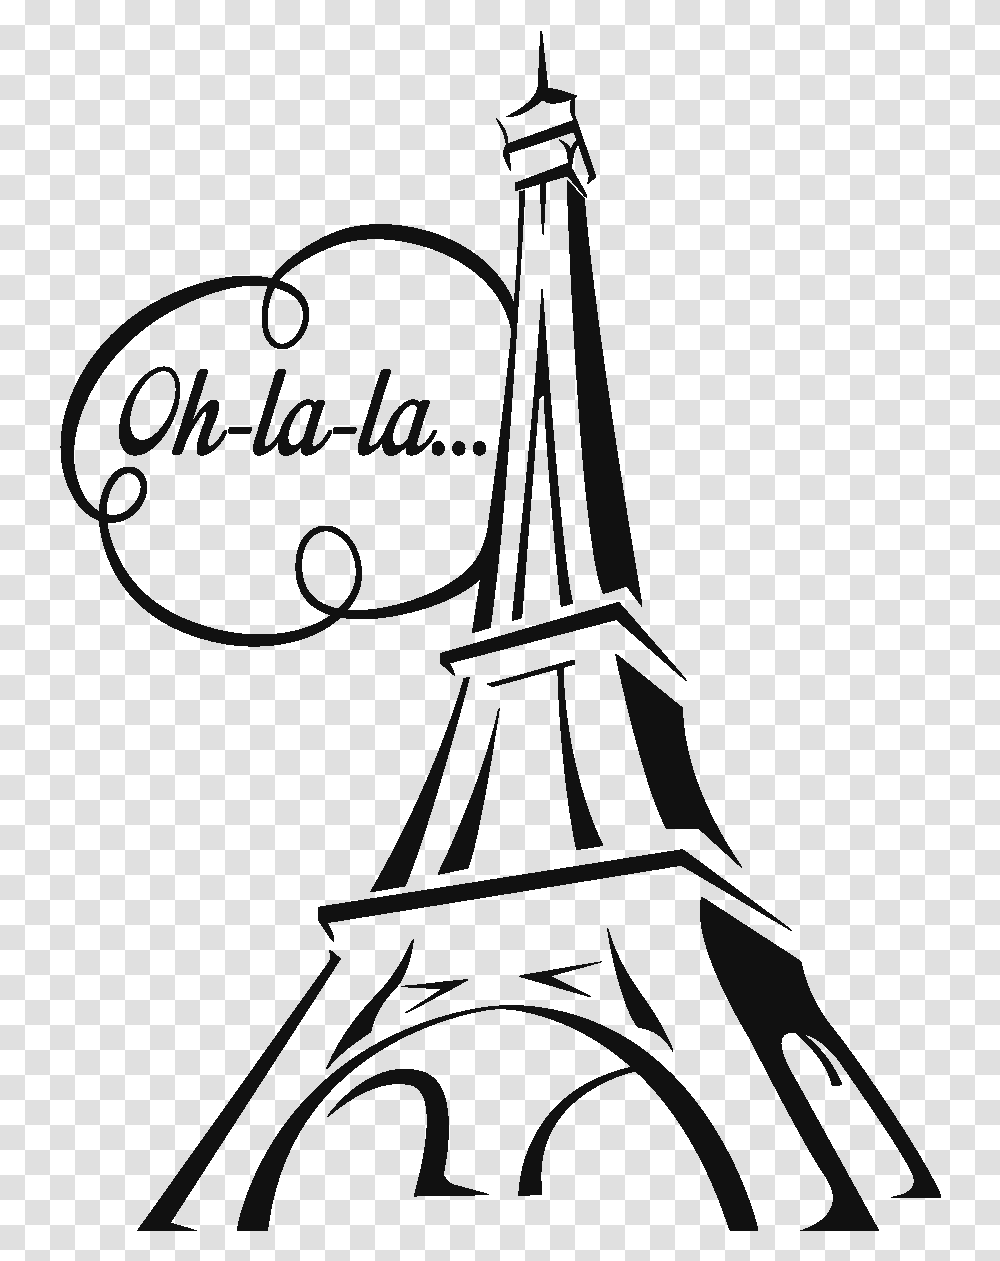 View Larger Image Image Free Vector Eiffel Tower Draw, Spire, Architecture, Building Transparent Png